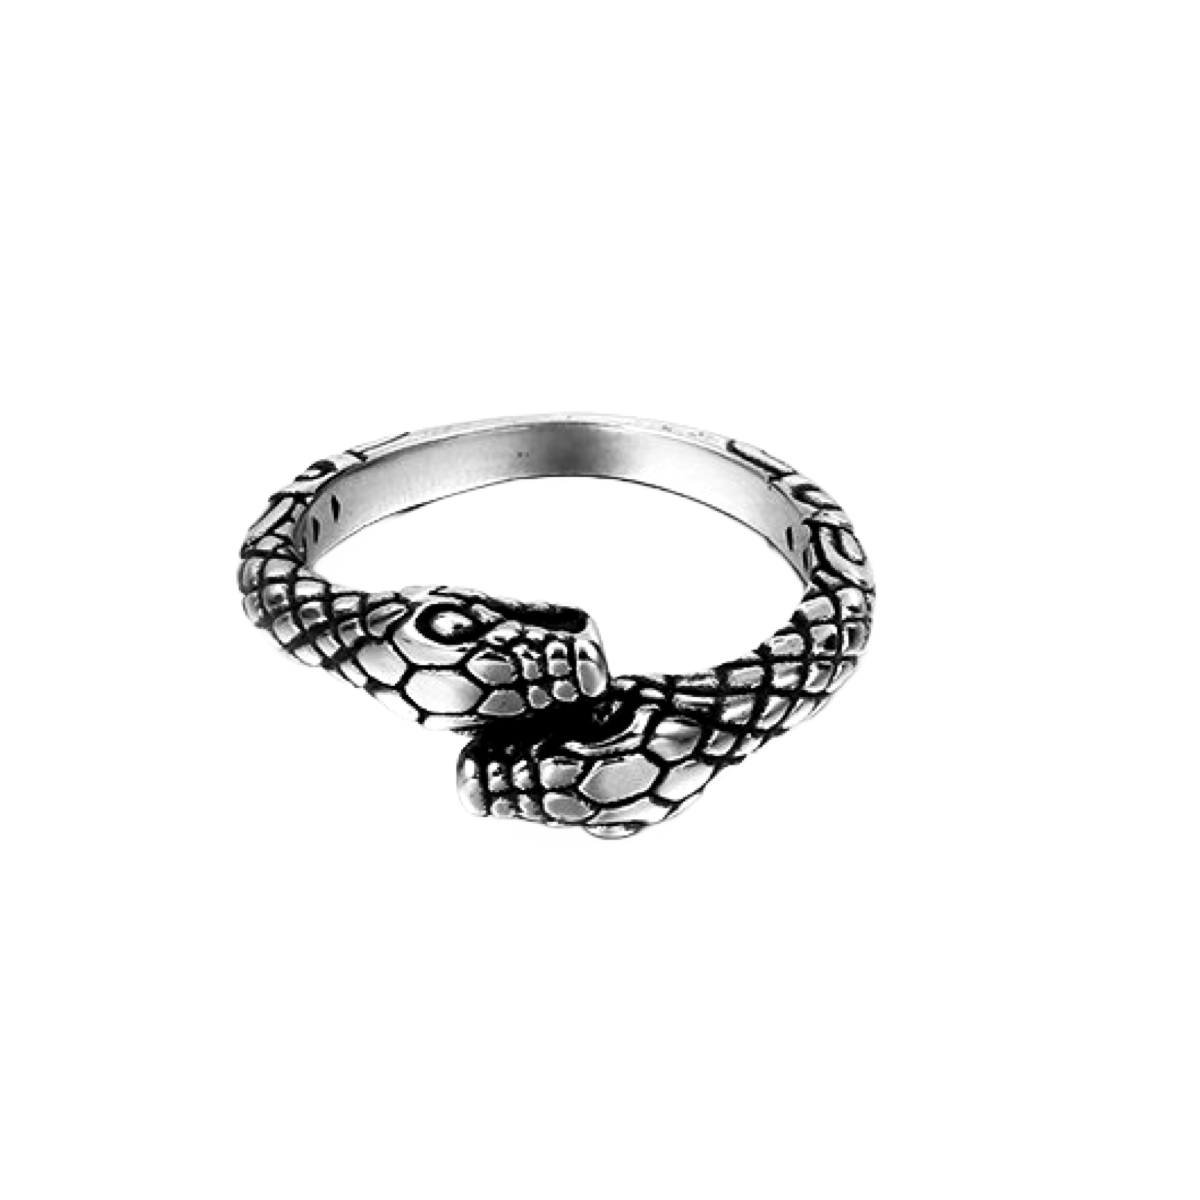 A Double Snake Head Ring from Rebel Saint Co on a white background.